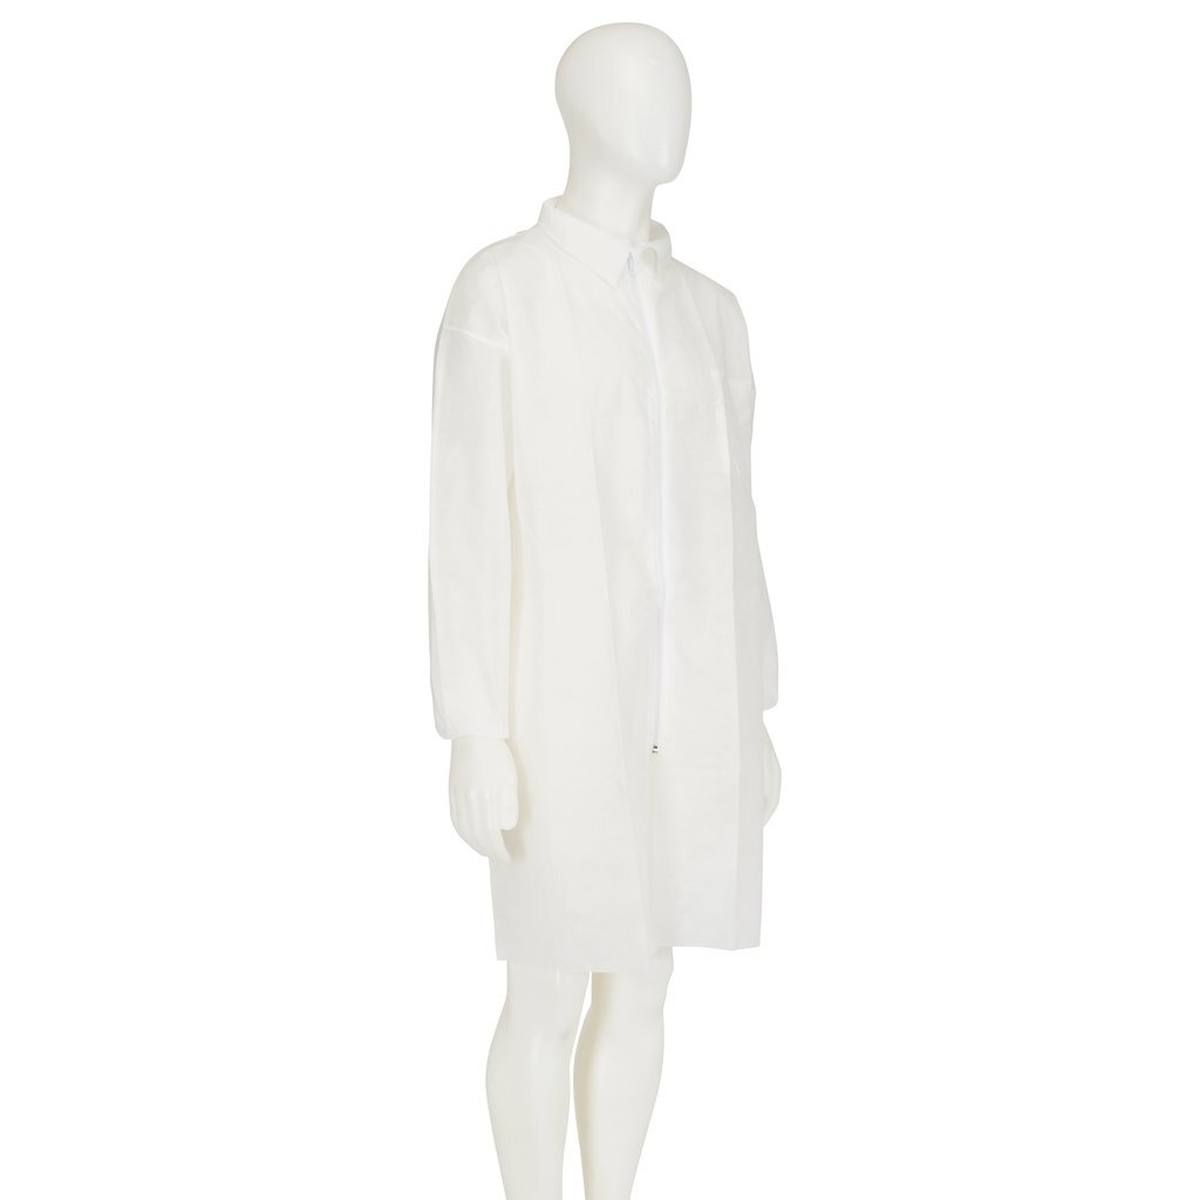 3M 4400 Coat, white, size 3XL, material 100% polypropylene, breathable, very light, with zip fastener